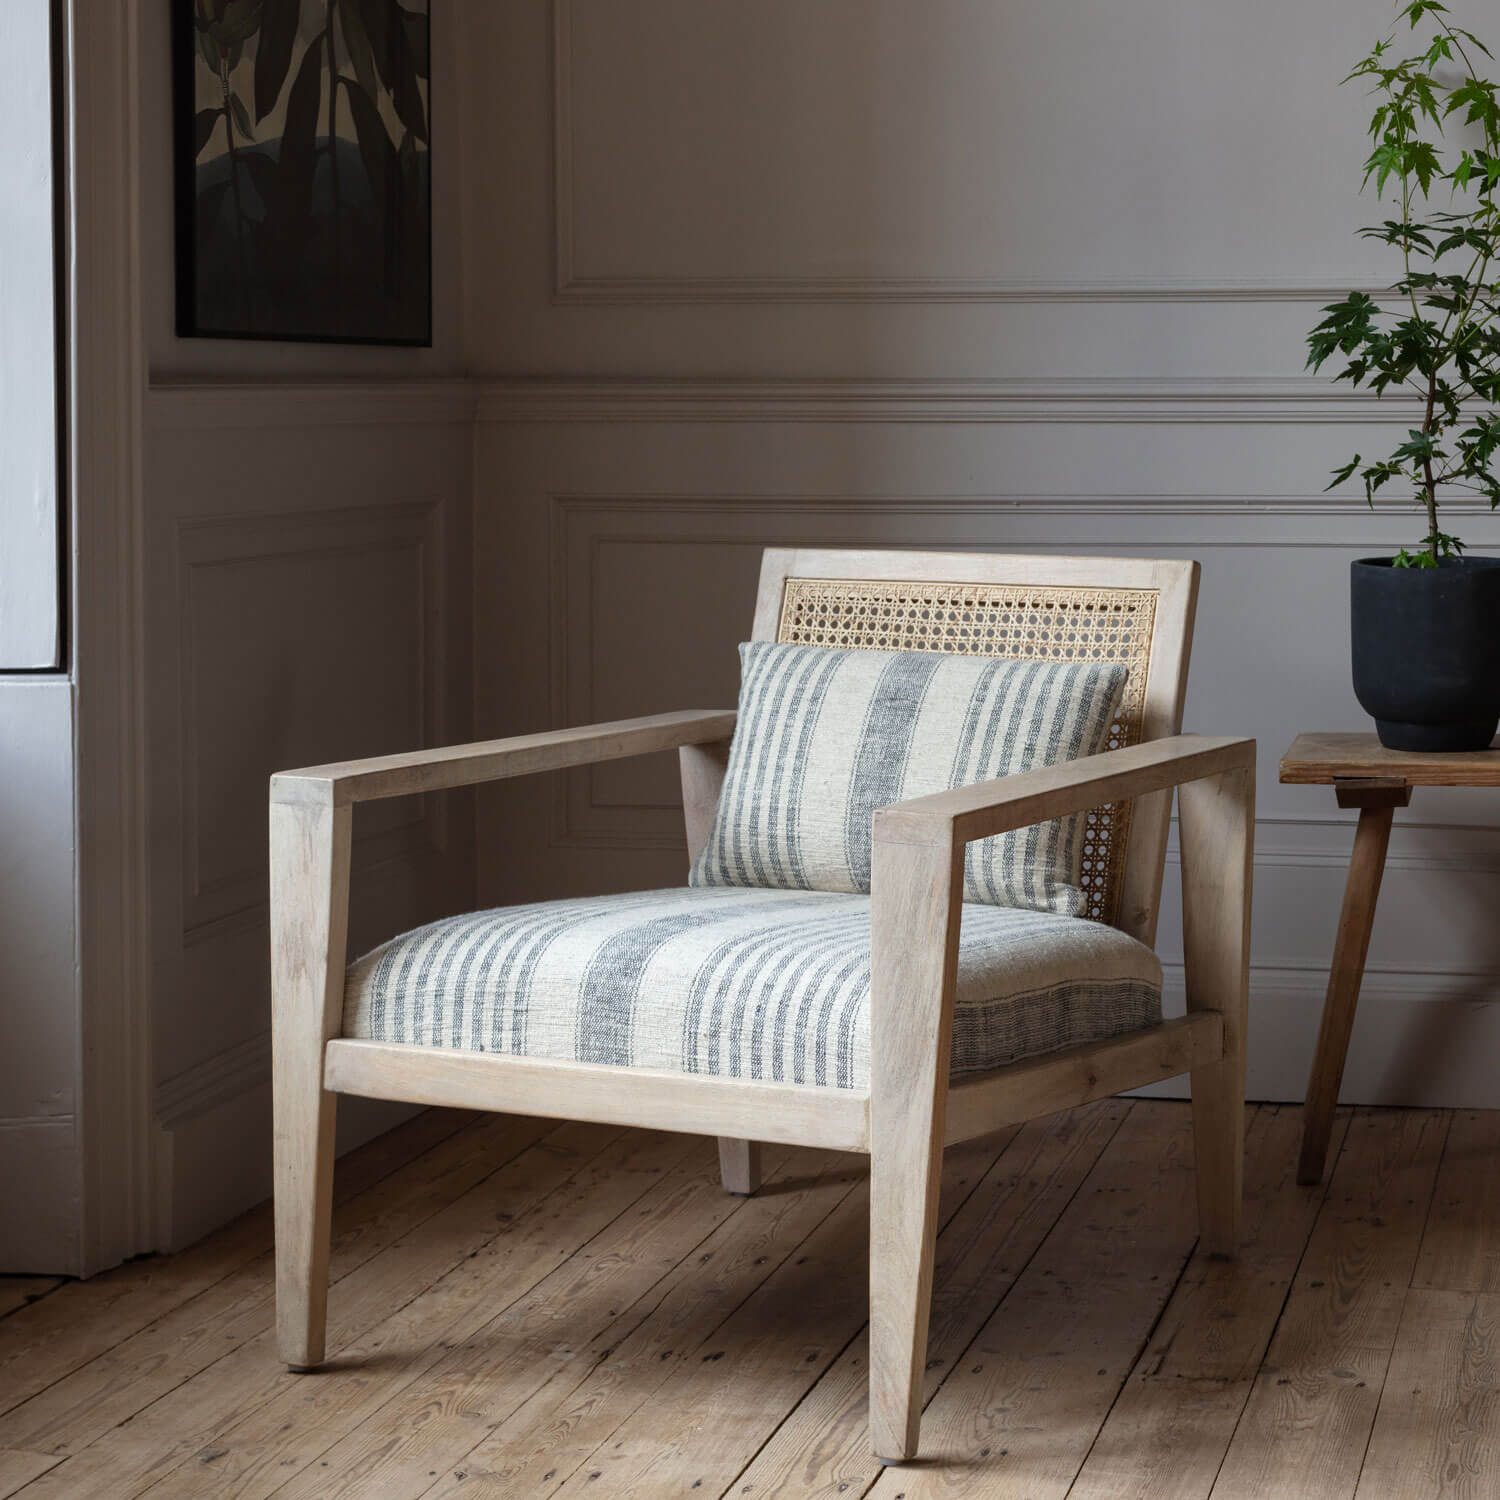 Read more about Graham and green laurel blue and white striped cane armchair